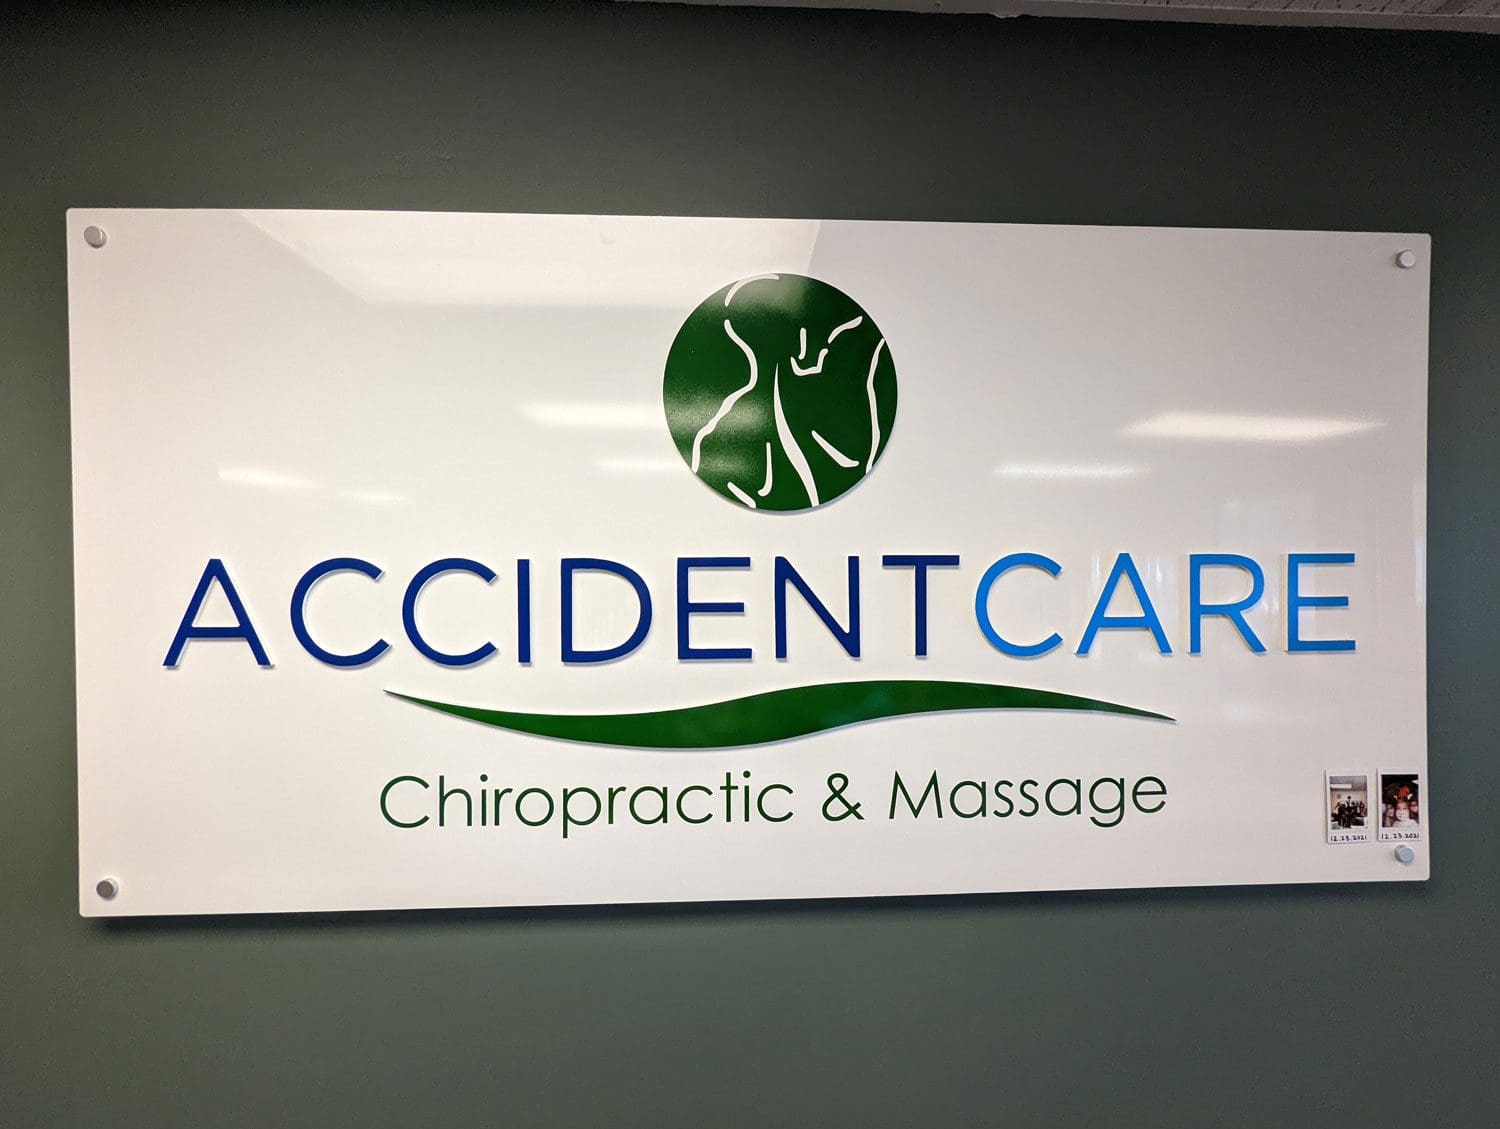 North East Portland Accident Care Chiropractic sign with logo.